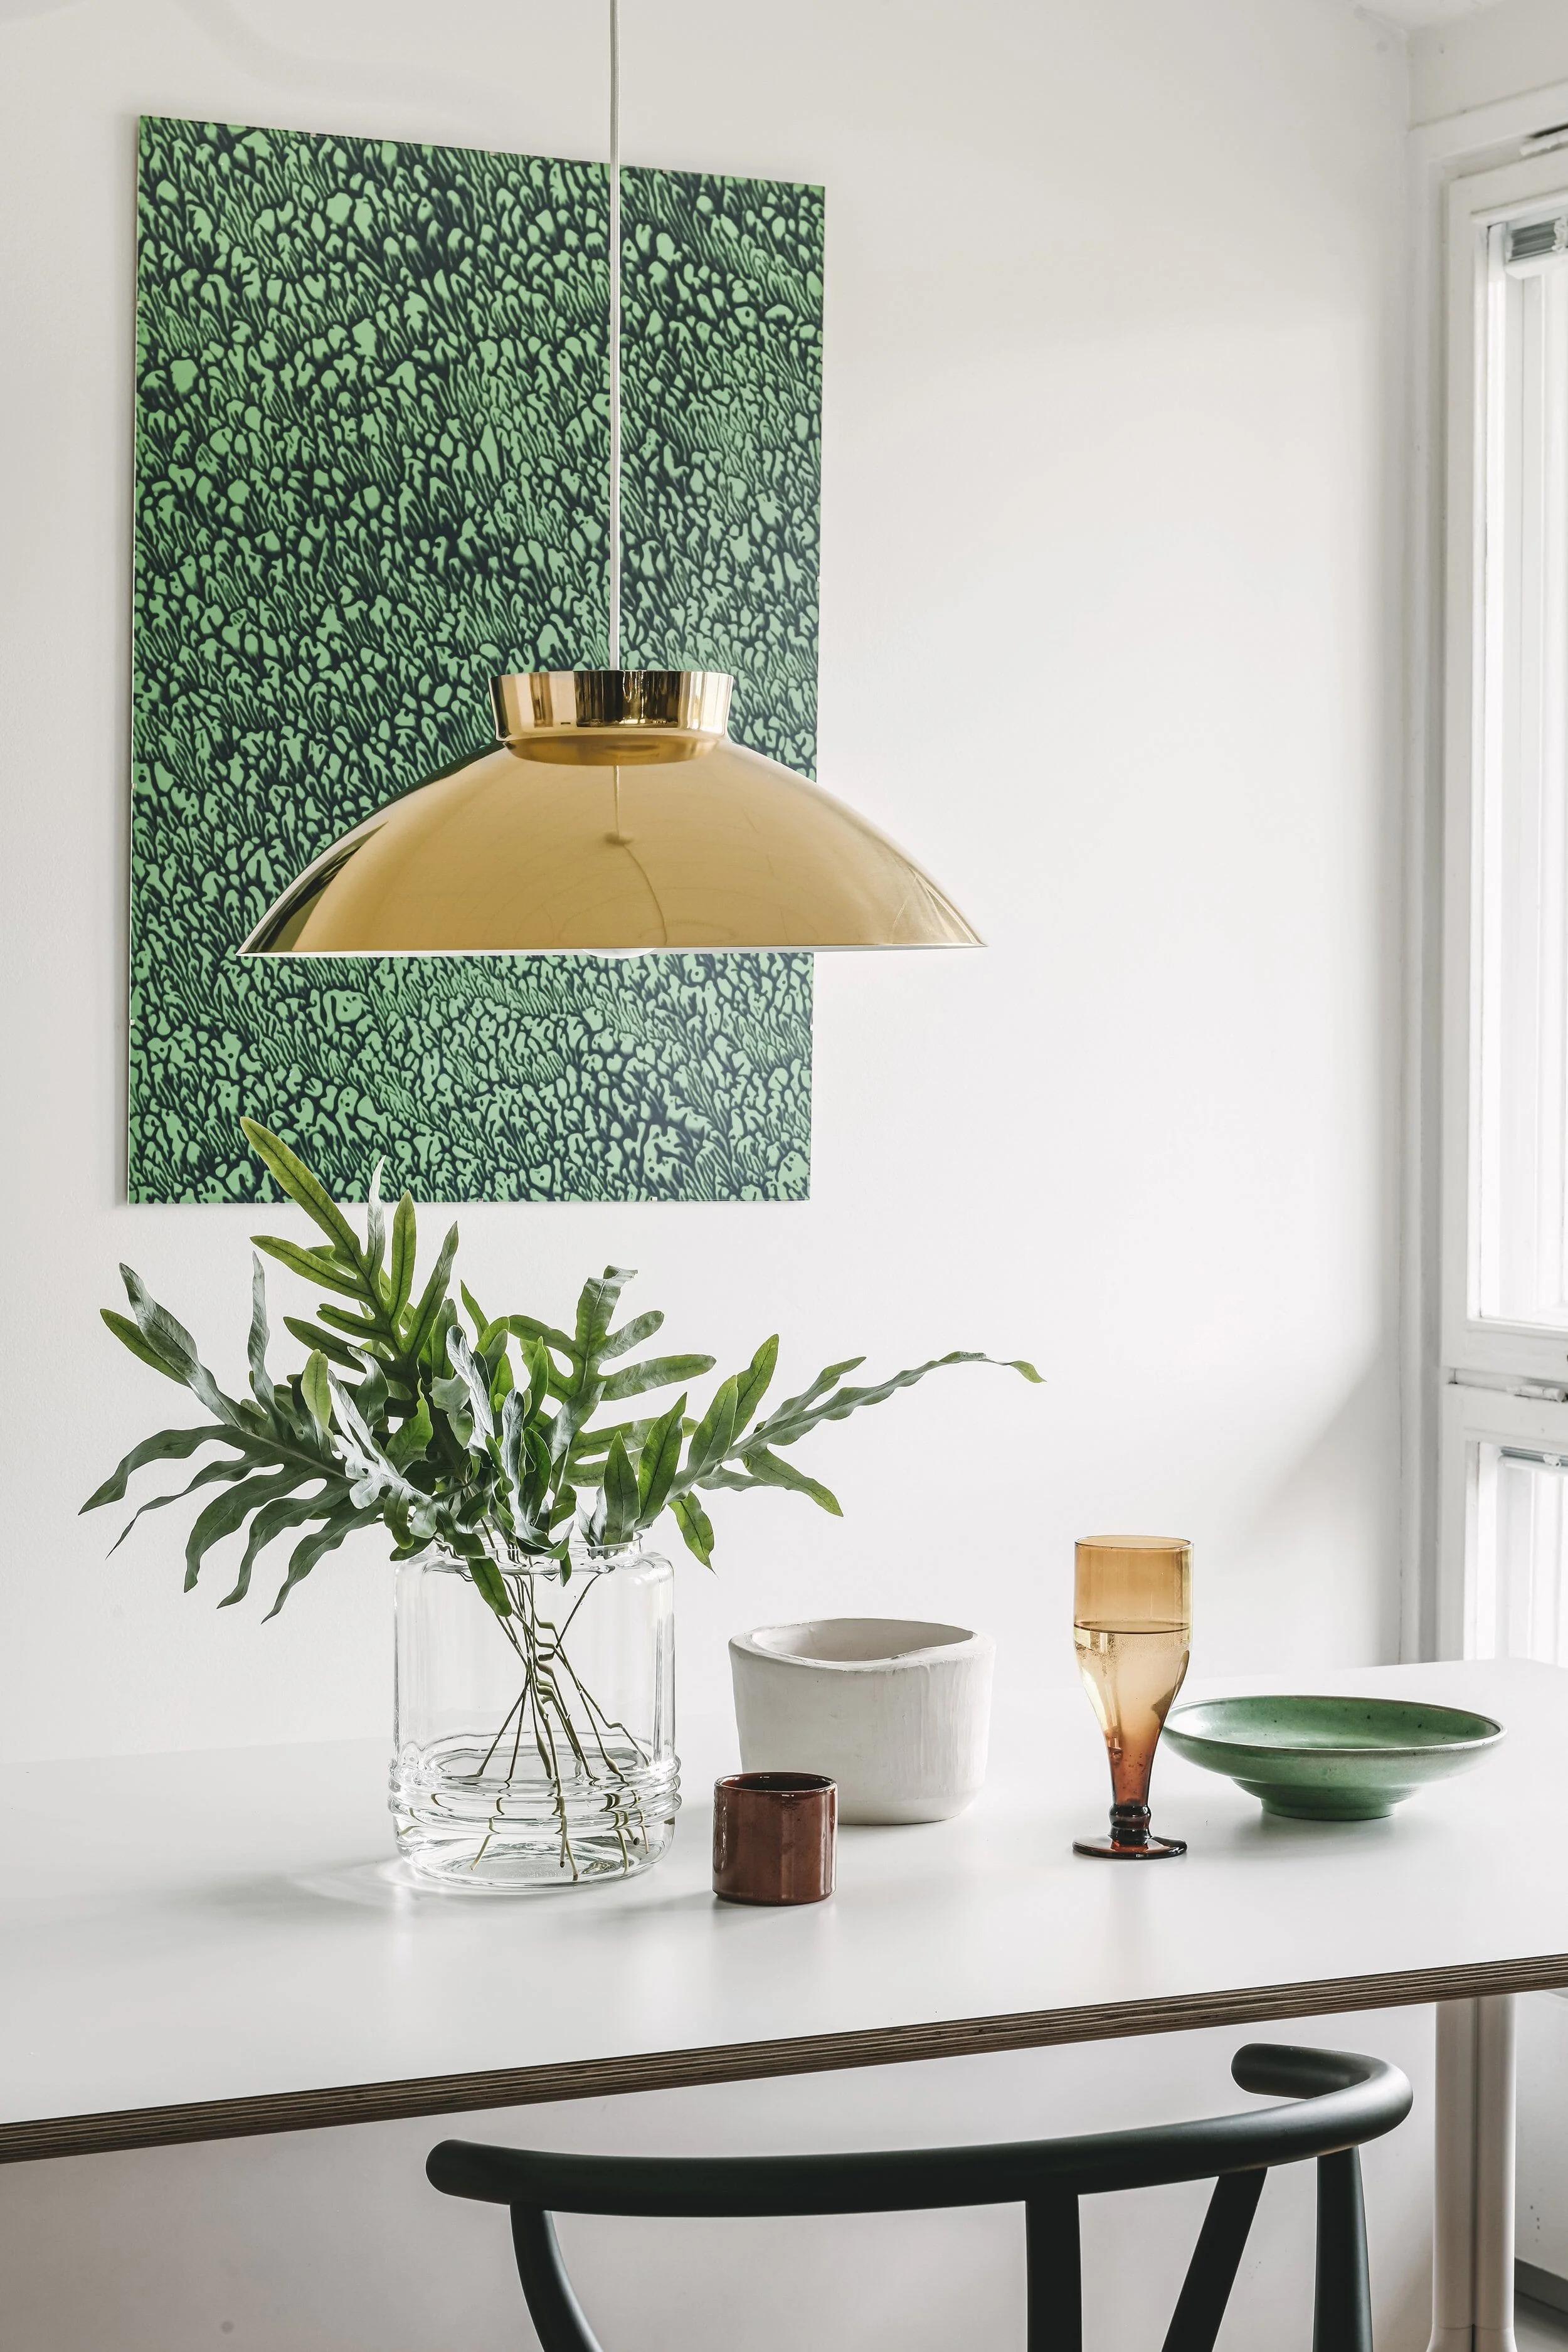 Pair of Lisa Johansson-Pape 'Sirri' Pendants in Brass for Innolux. Originally designed in the 1960s, these authorized re-editions by Innolux Oy of Finland are true to the original charming simplicity of Pape's iconic vision. The high-quality